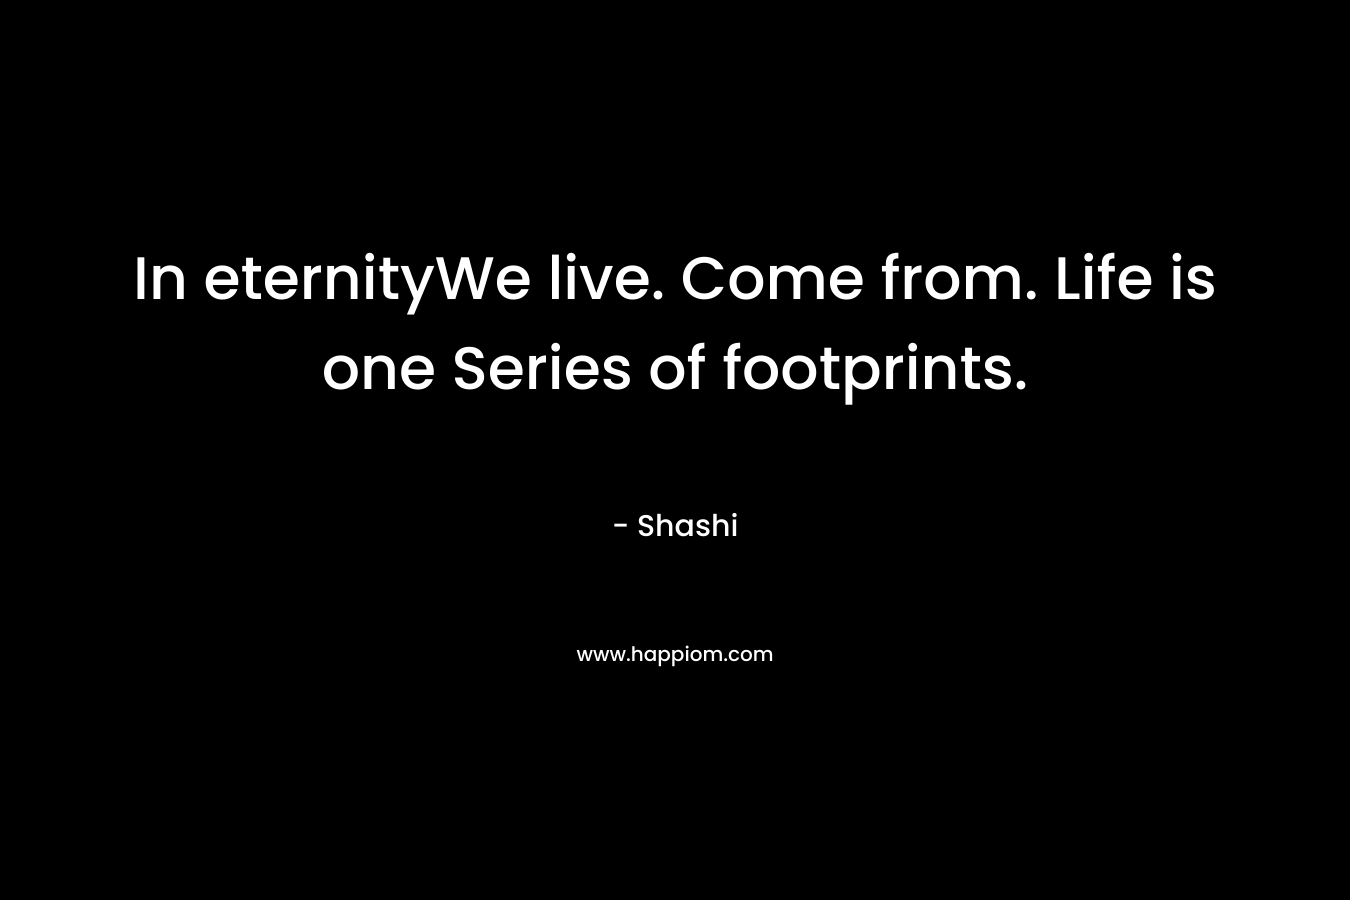 In eternityWe live. Come from. Life is one Series of footprints.